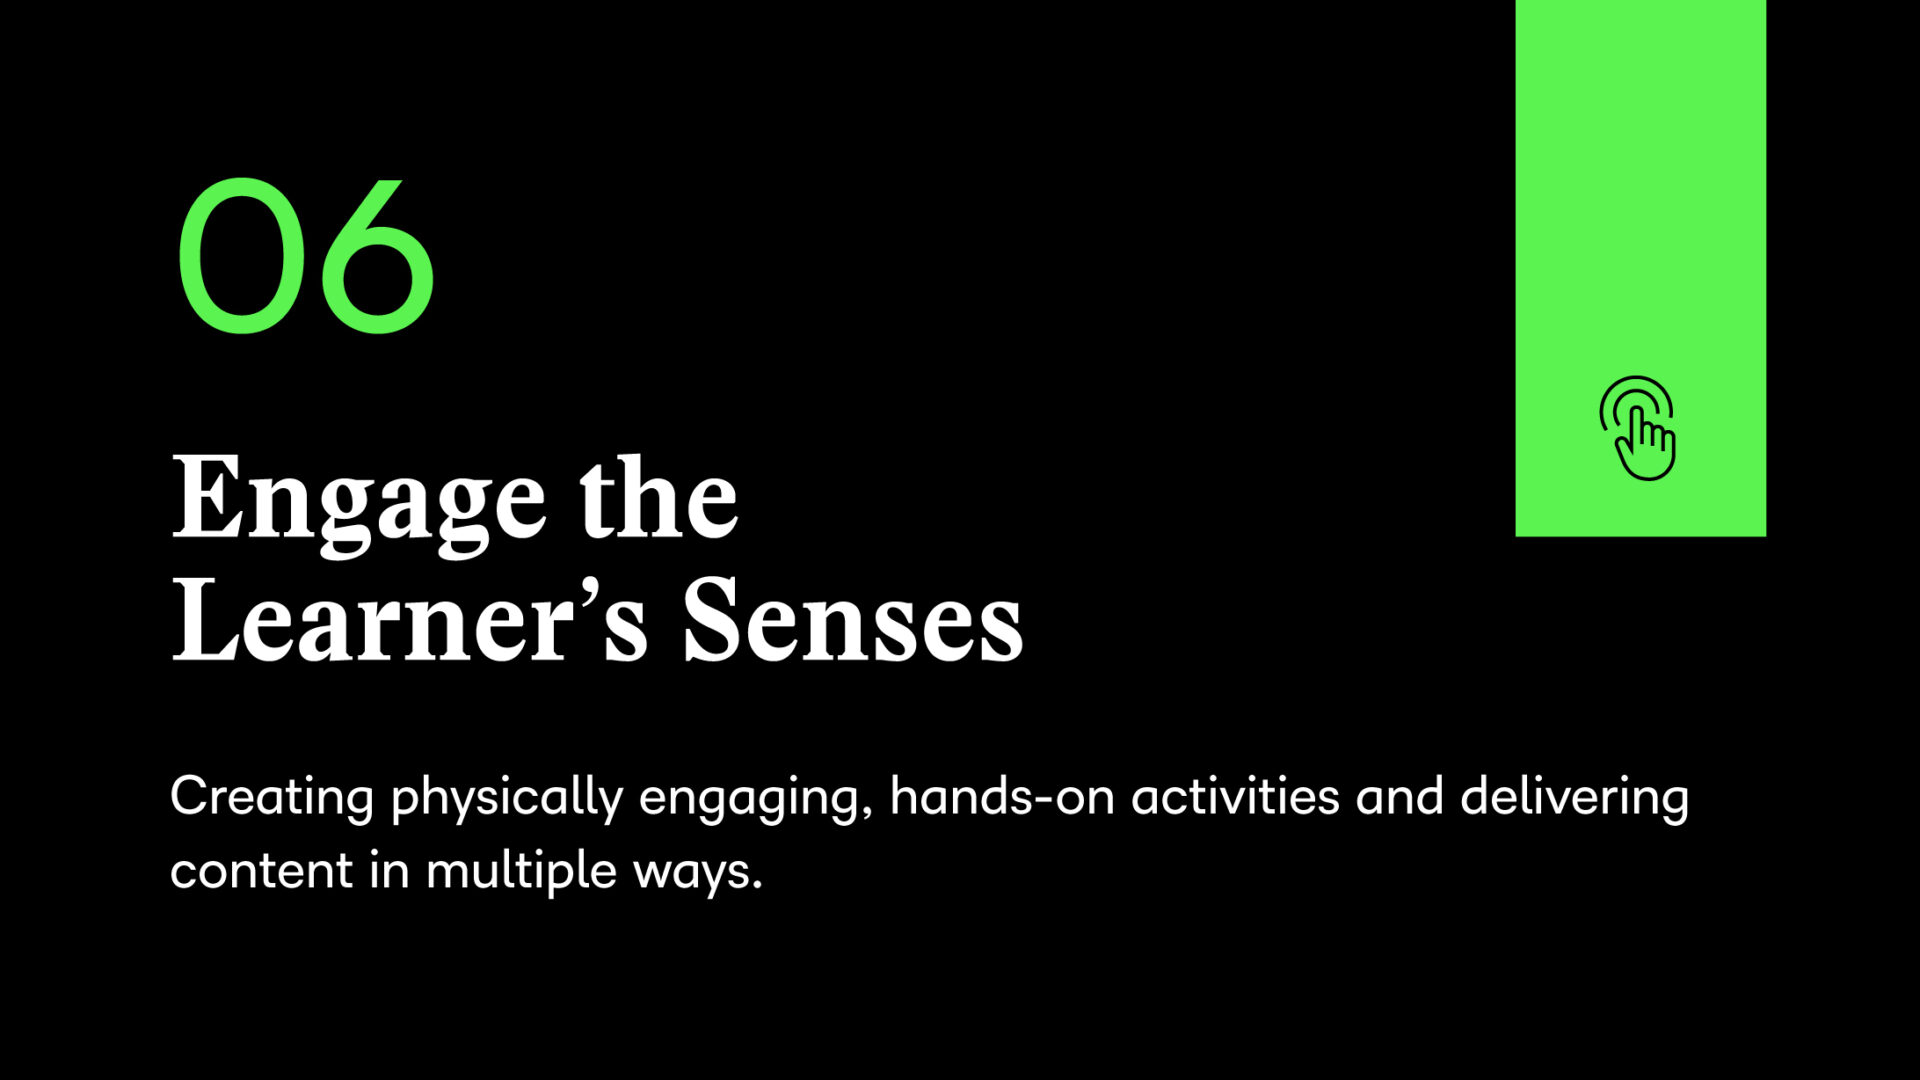 Engage the learner's senses